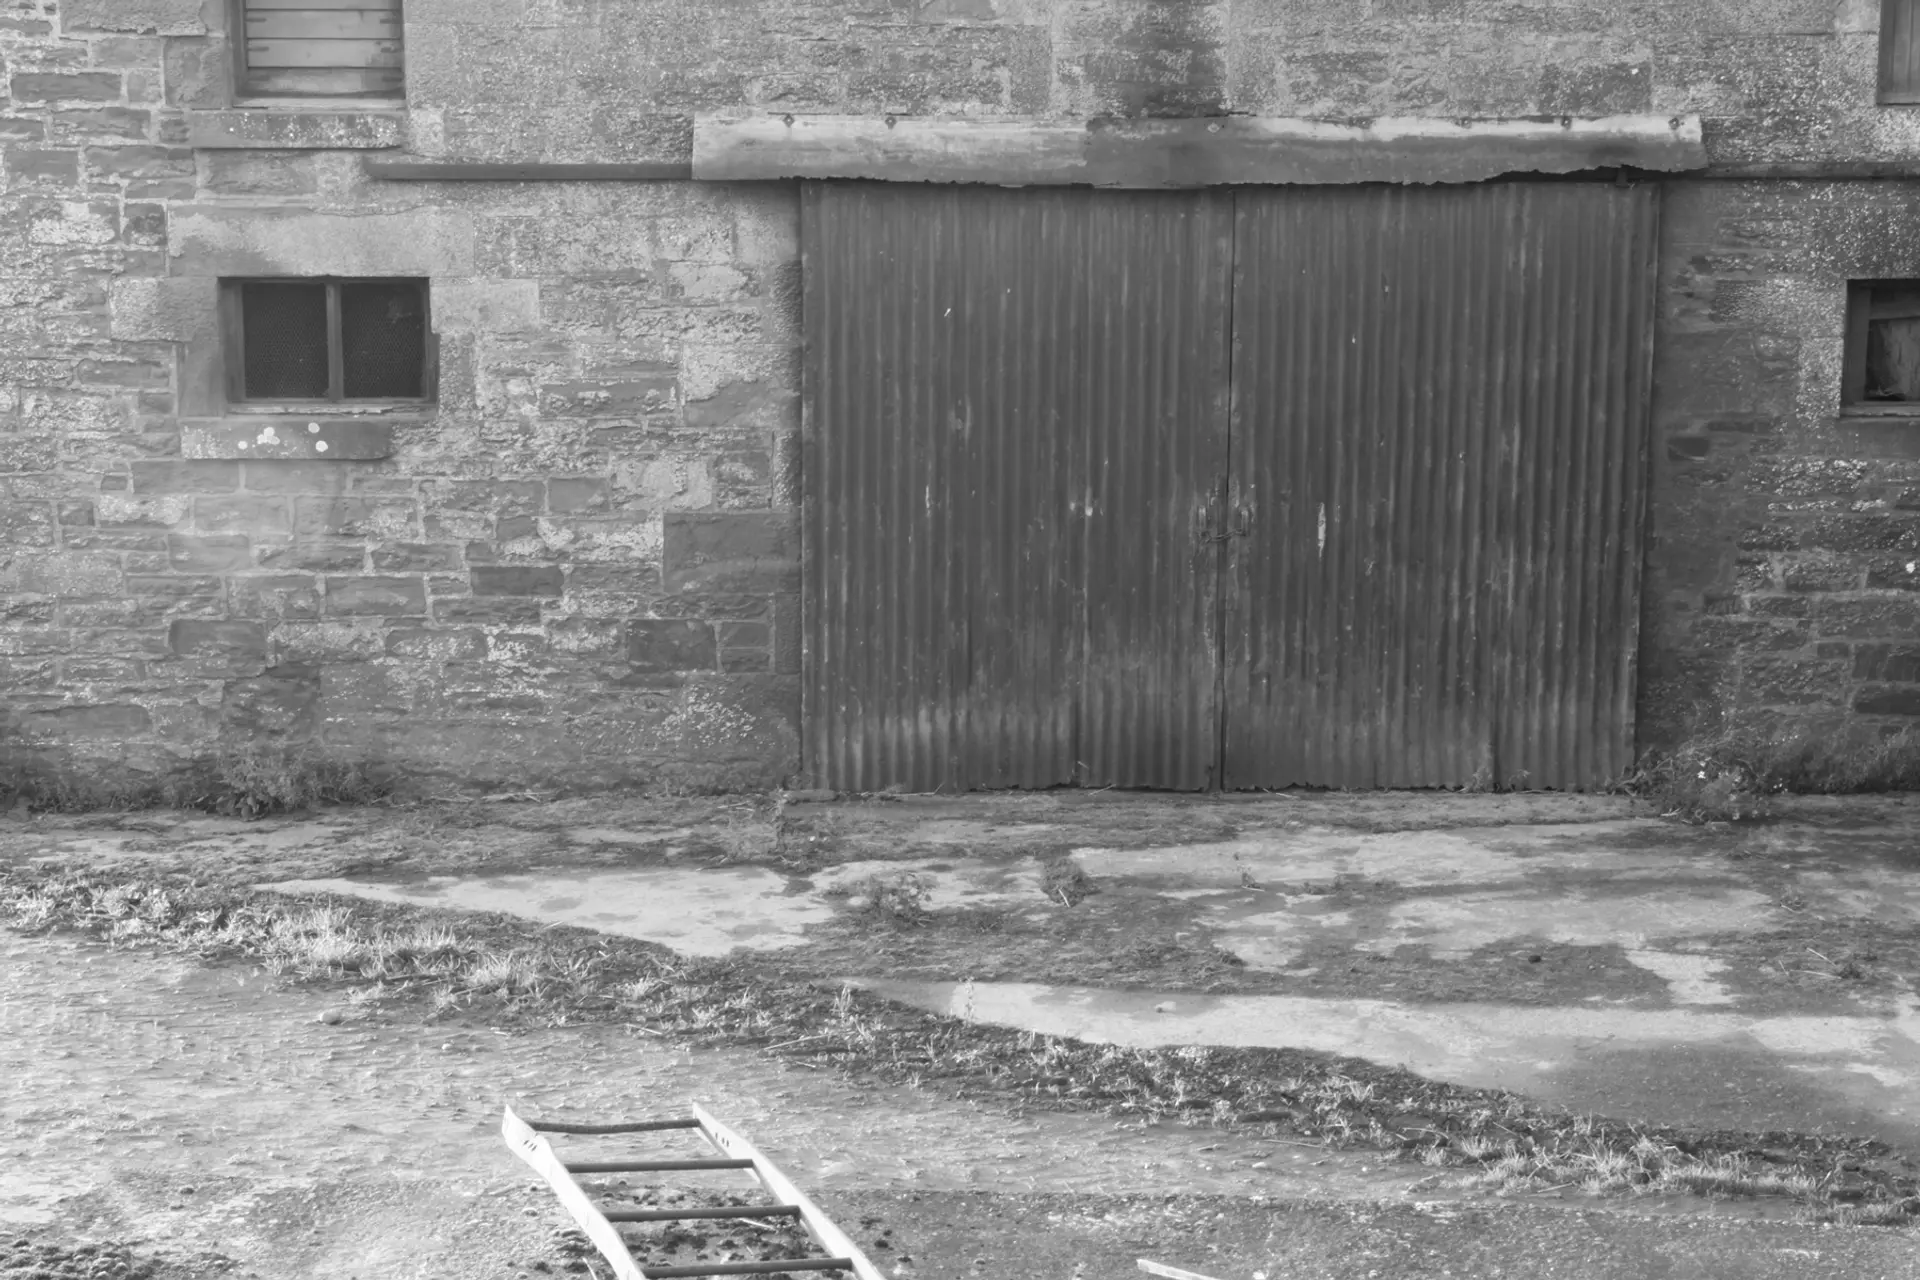 A grayscale image of a farm building. The ground is made of large stone slabs, and we are facing a stone facade of a building. The door is corrugated and there are two small windows. 